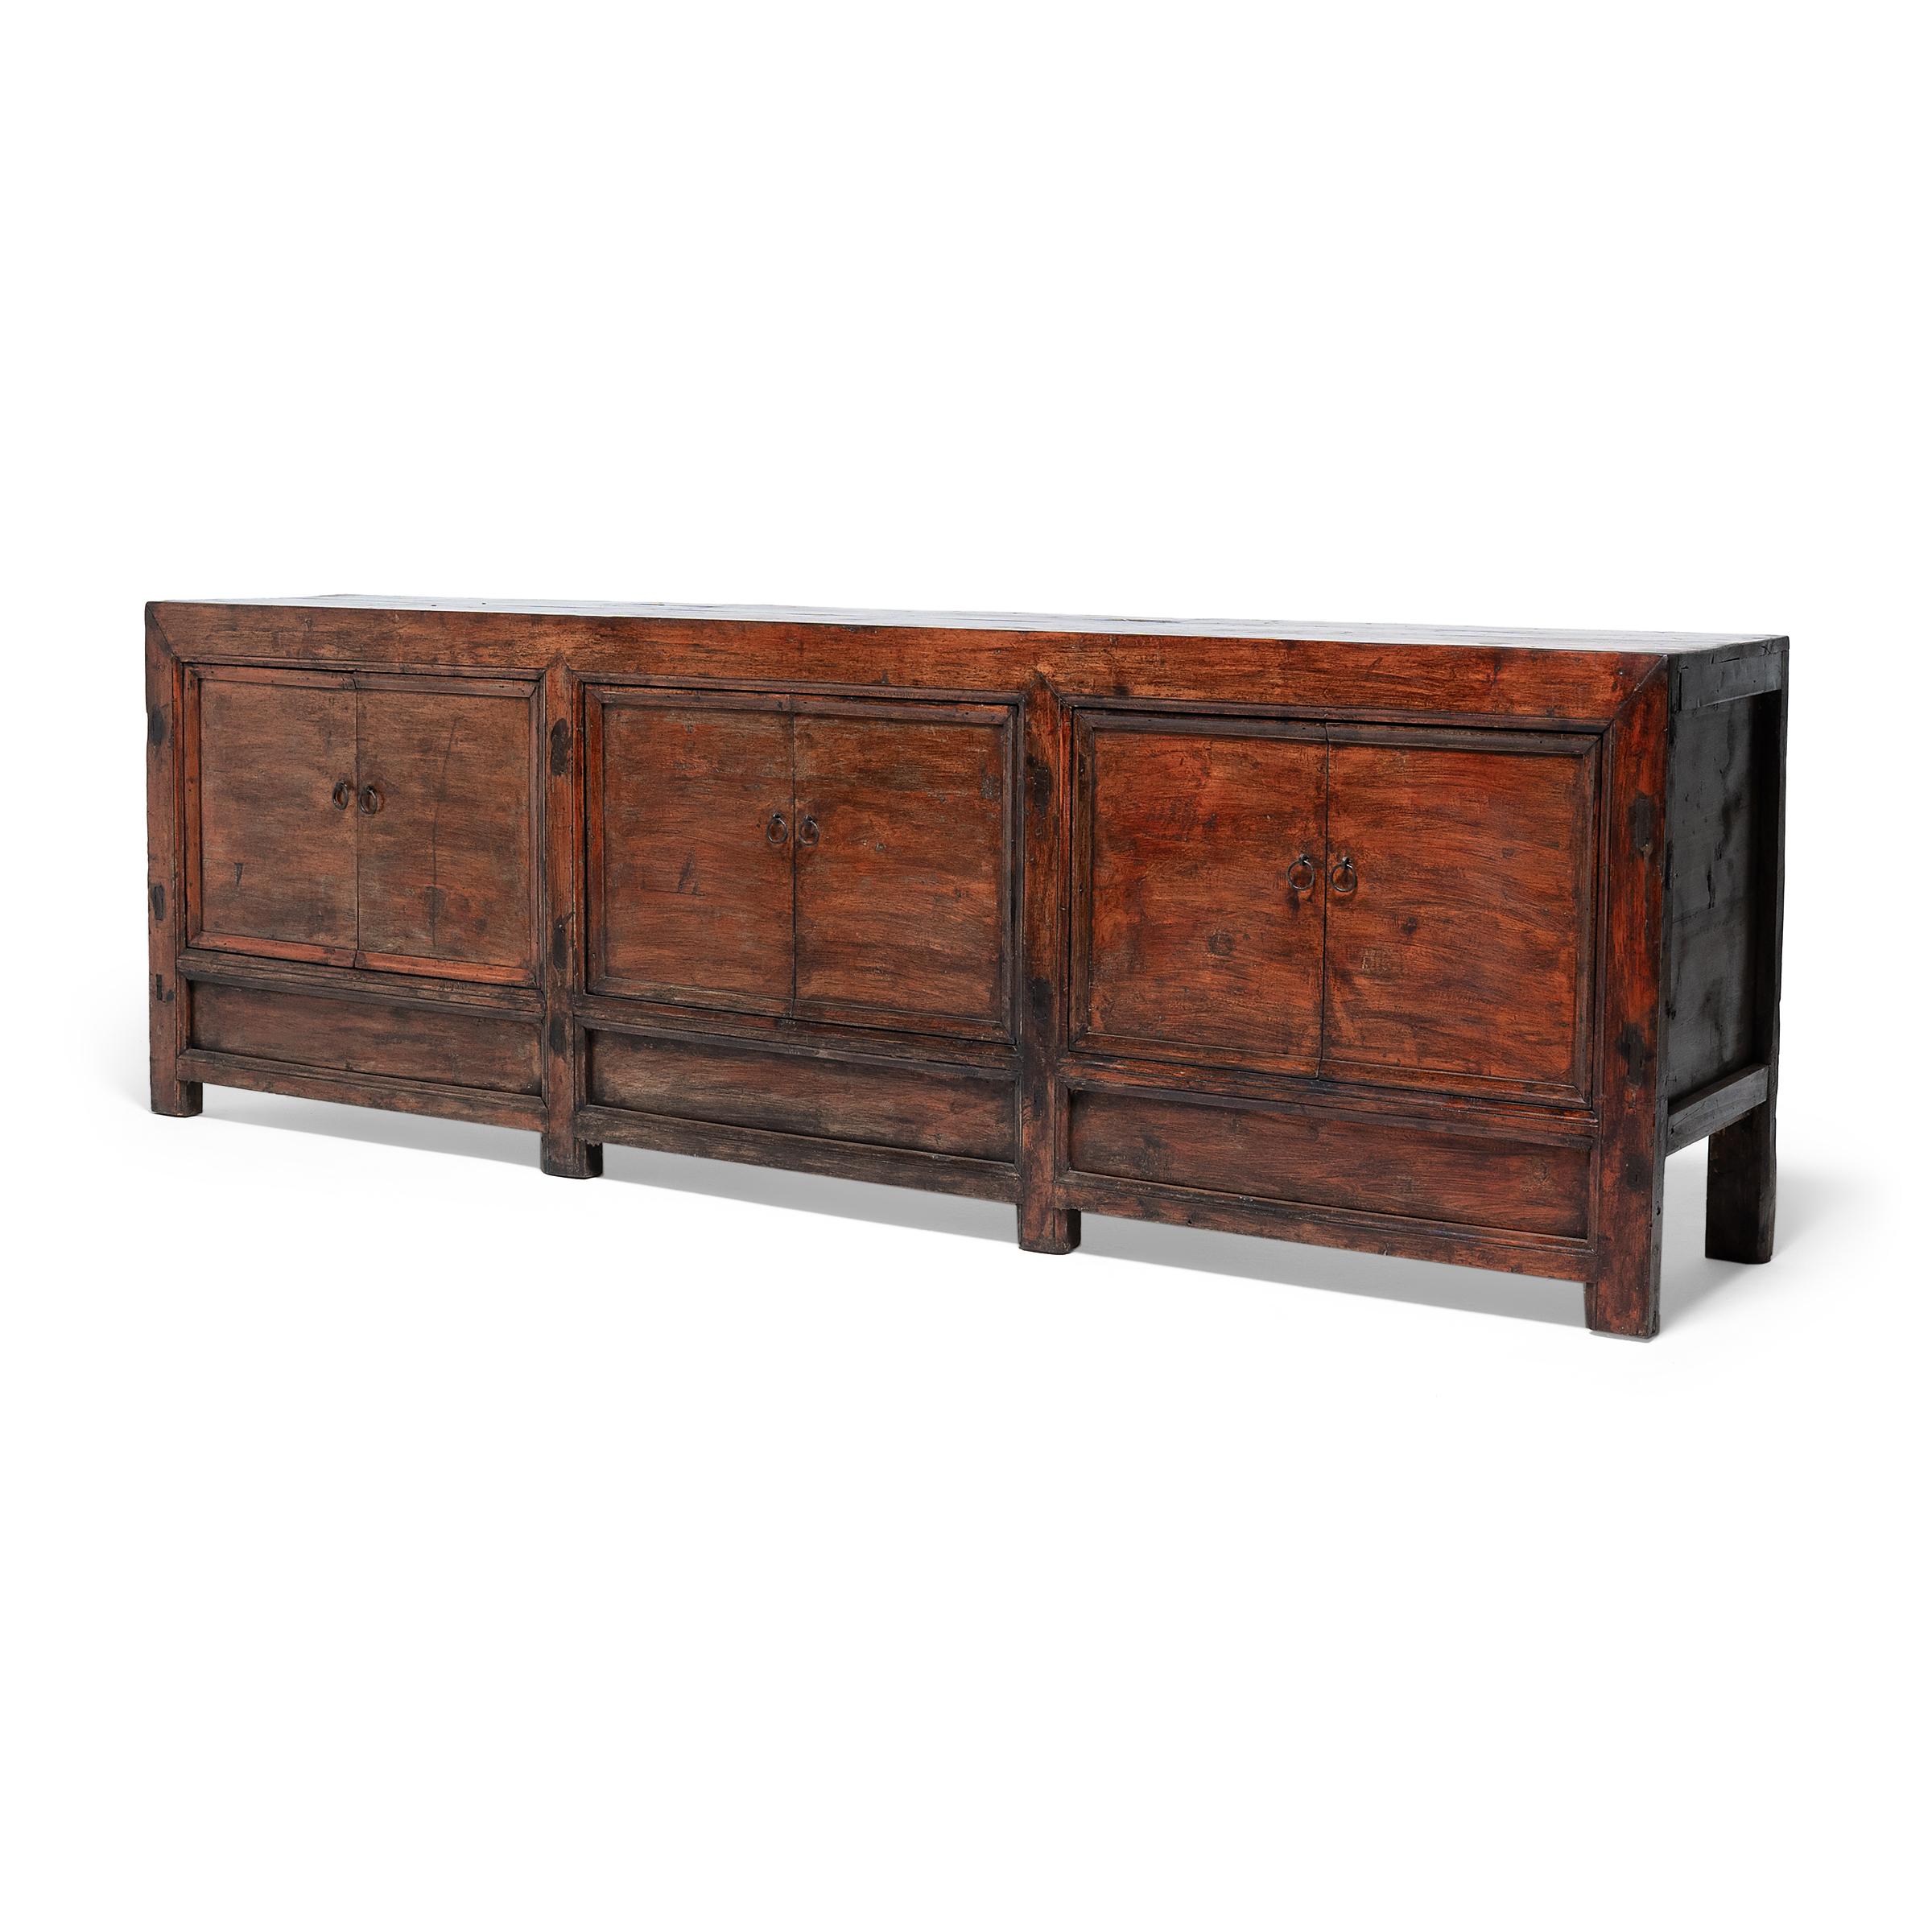 Created in the style of Mongolian storage coffers, this late 19th-century herdsman's chest has a straightforward design and plenty of rustic appeal. Originally configured to open from the top, the coffer was modified with six front-facing doors by